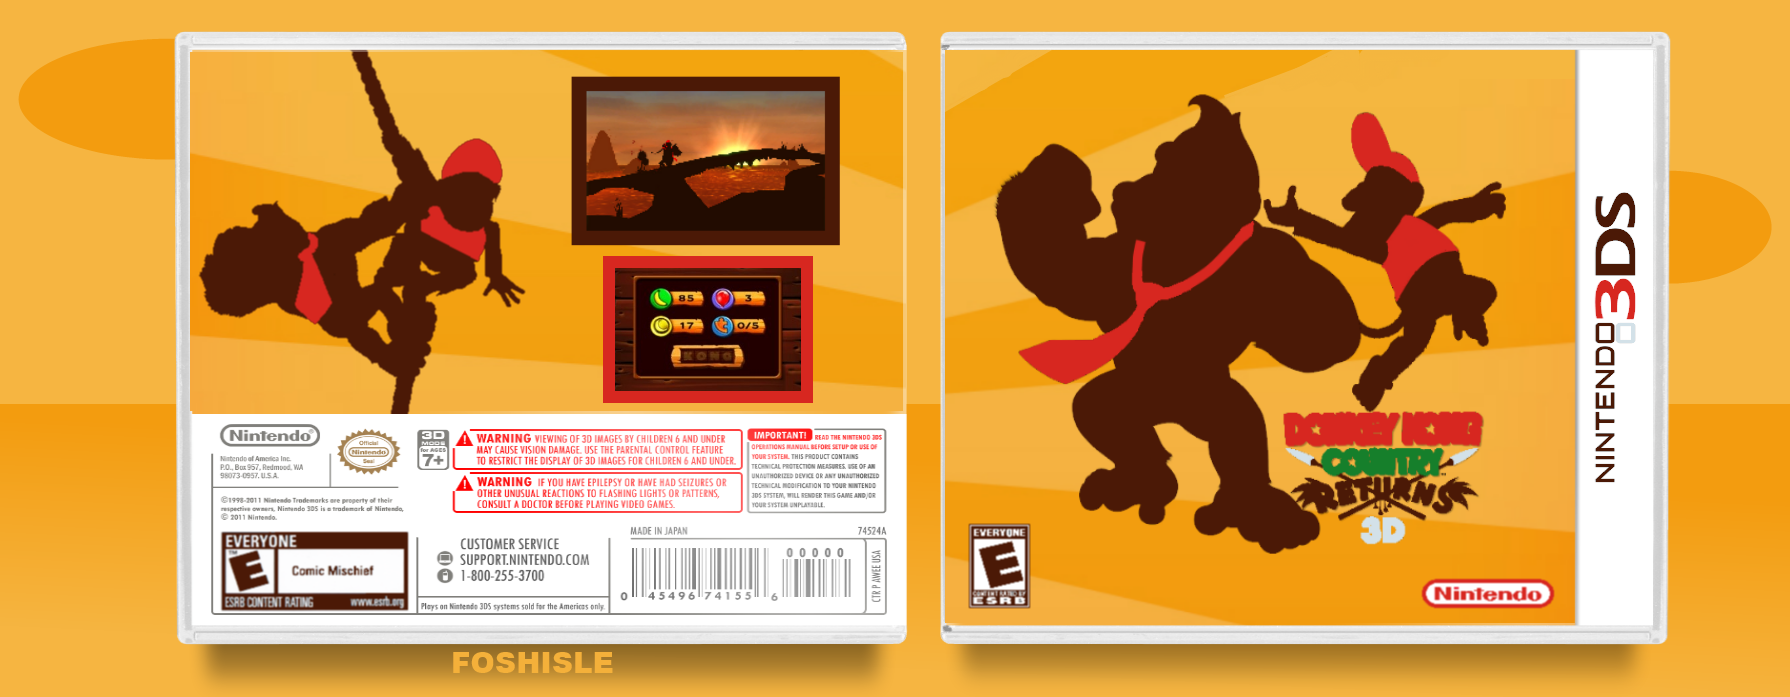 Donkey Kong Country Returns 3D box cover